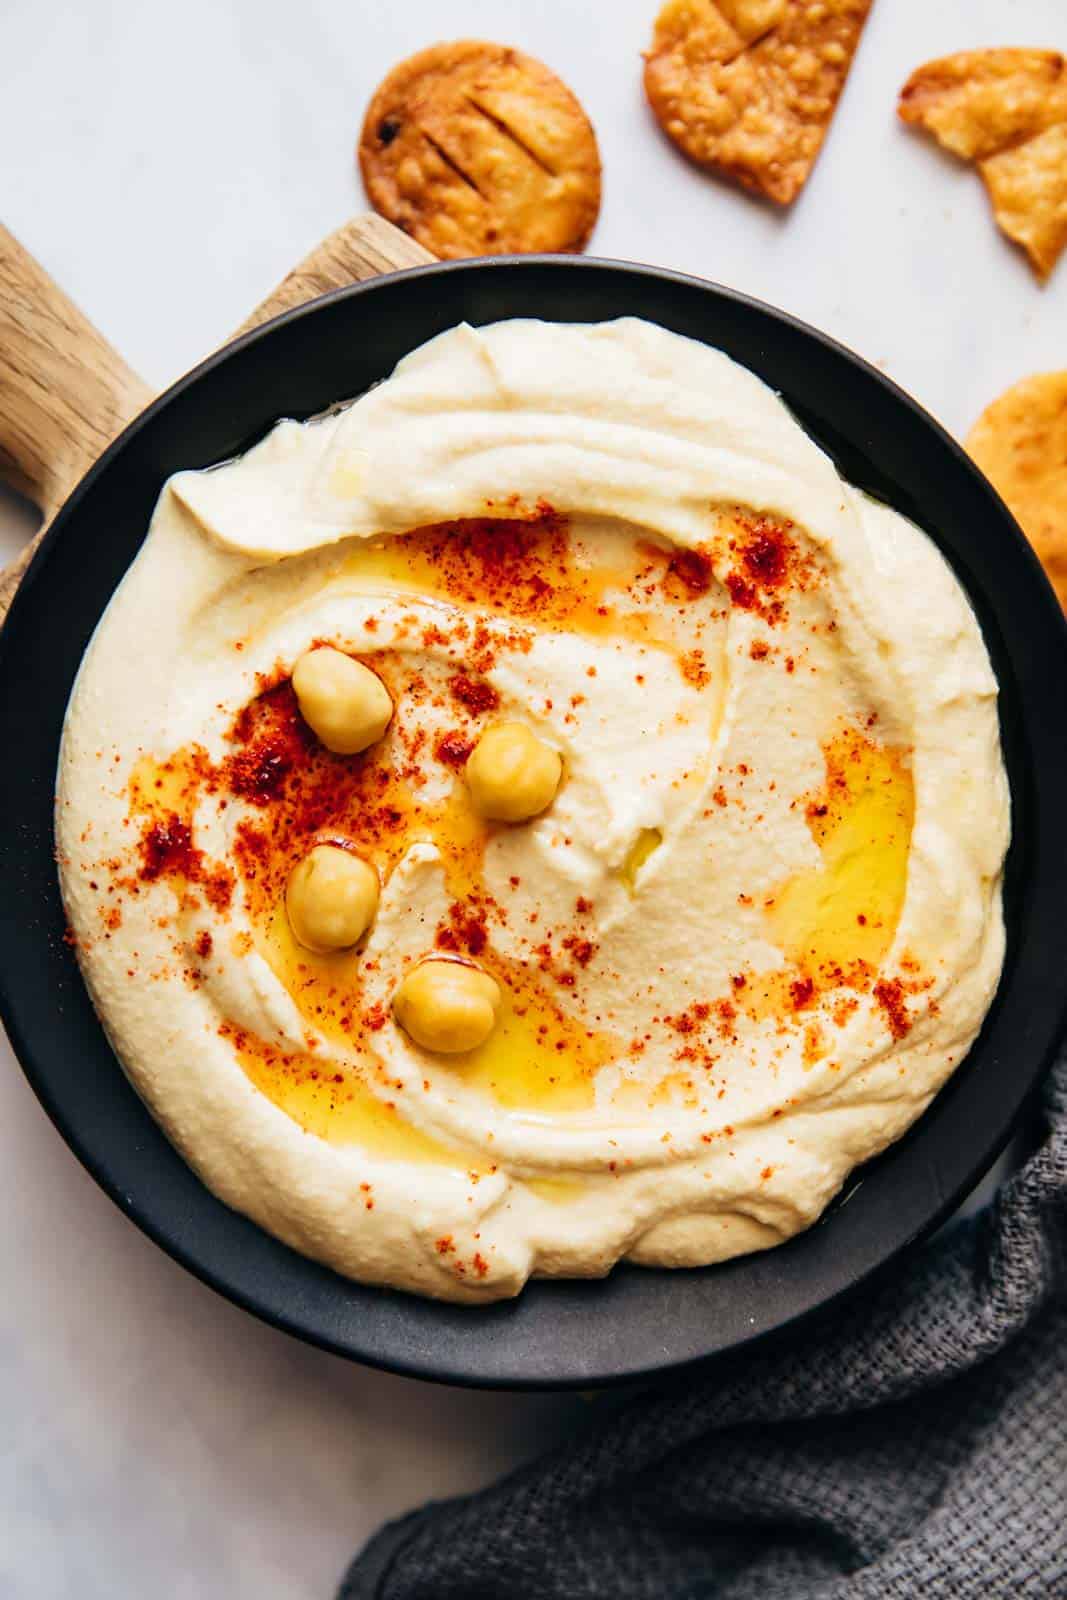 How to make Hummus at home thats light and airy - My Food Story